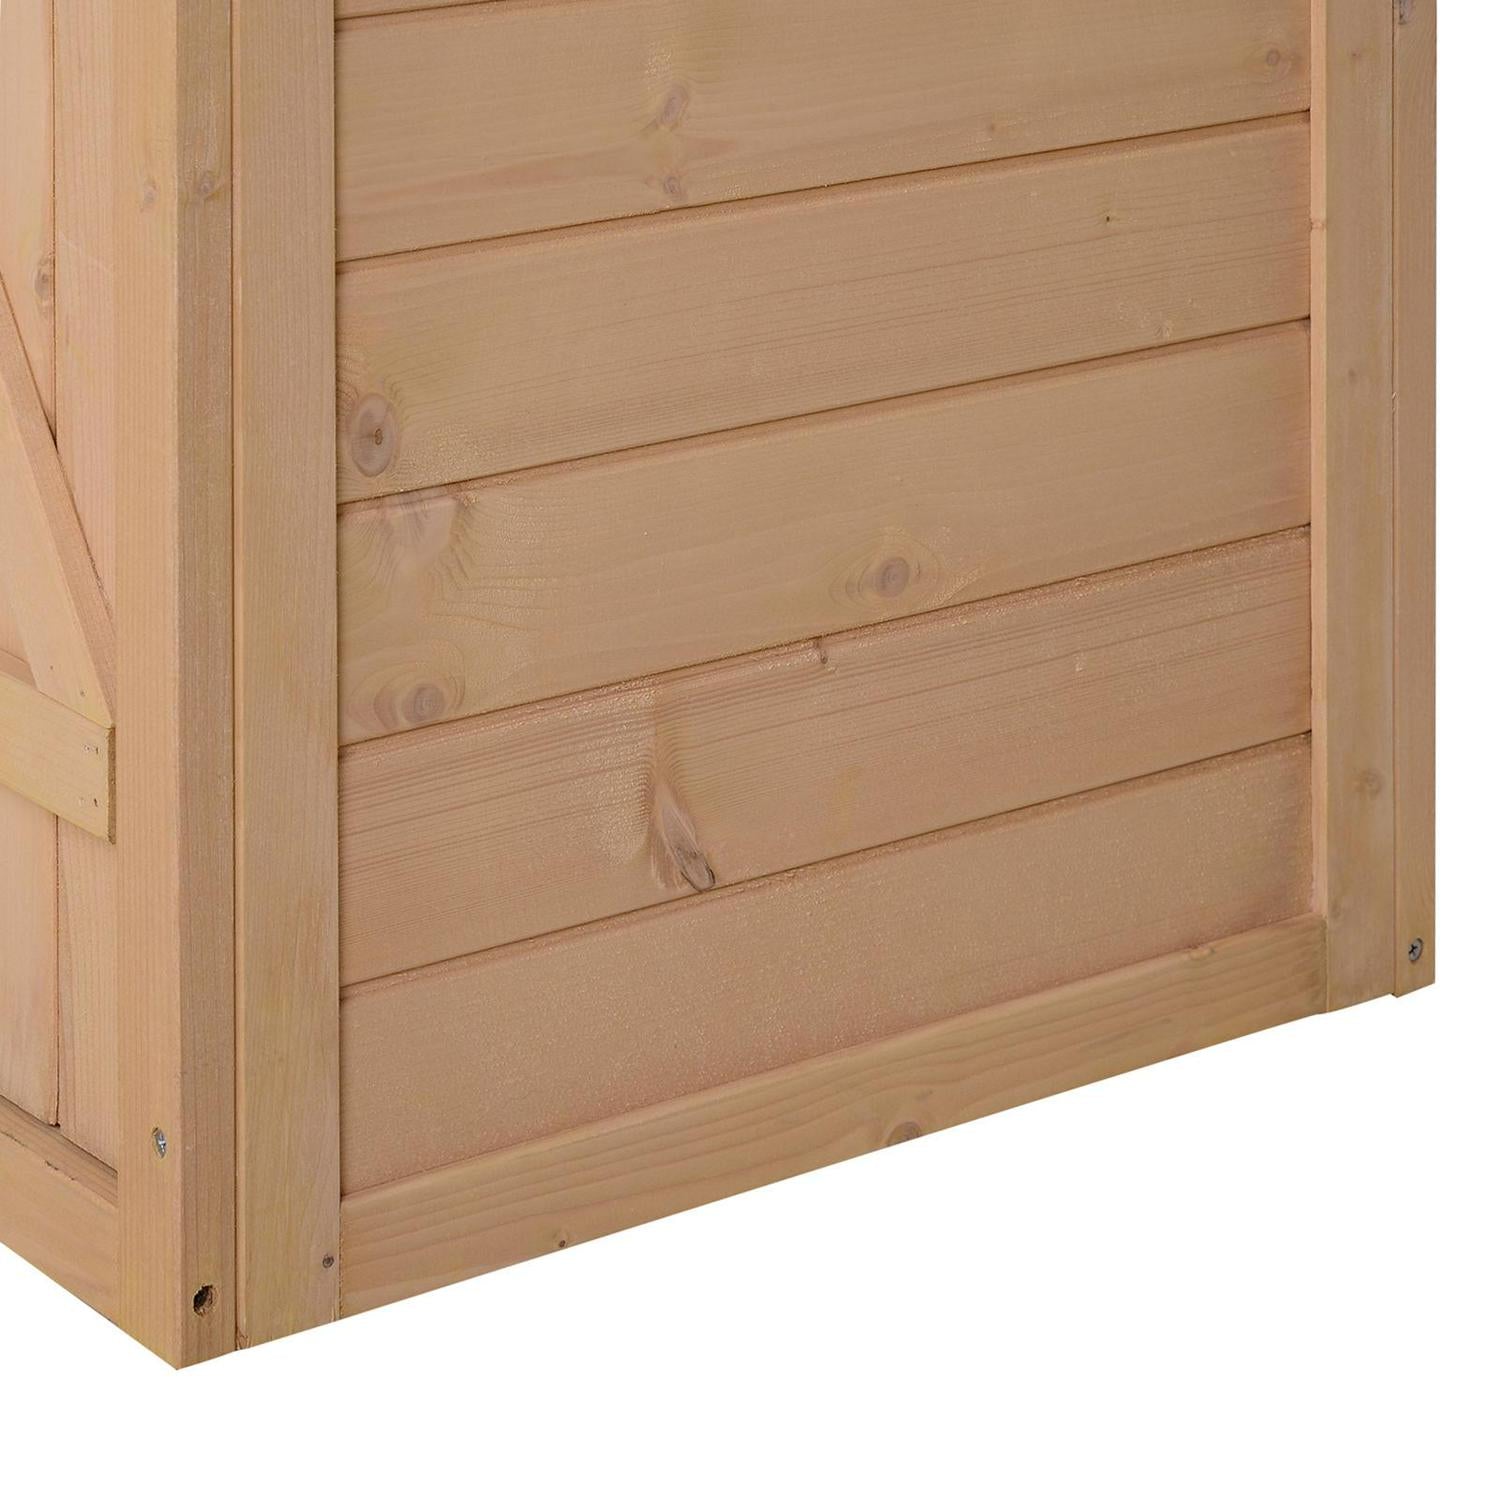 Small Fir Wood Garden Storage Shed With Shelves 1.8 X 2.4ft